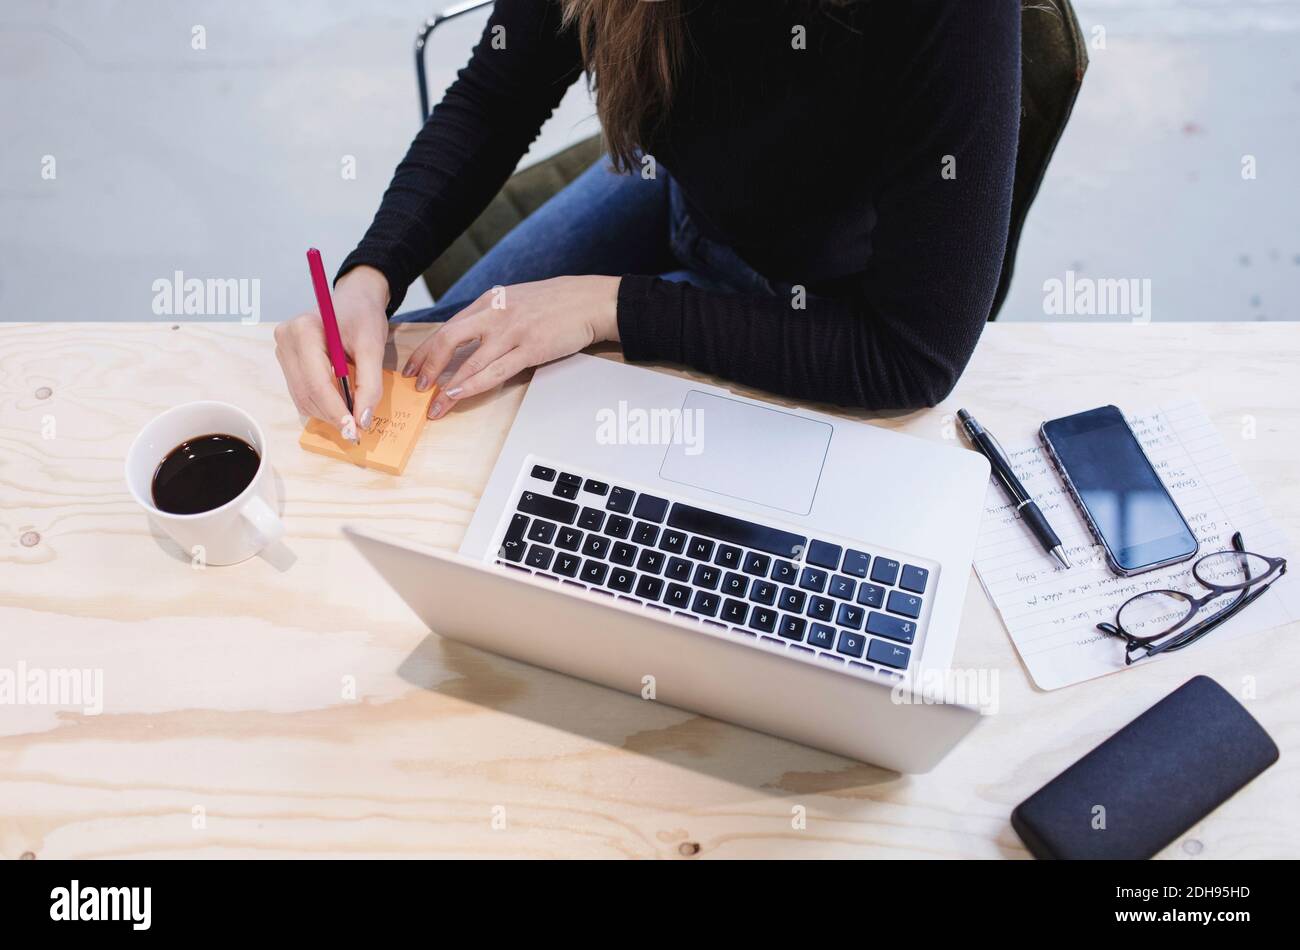 High angle view of young woman writing on adhesive note by laptop at desk Stock Photo